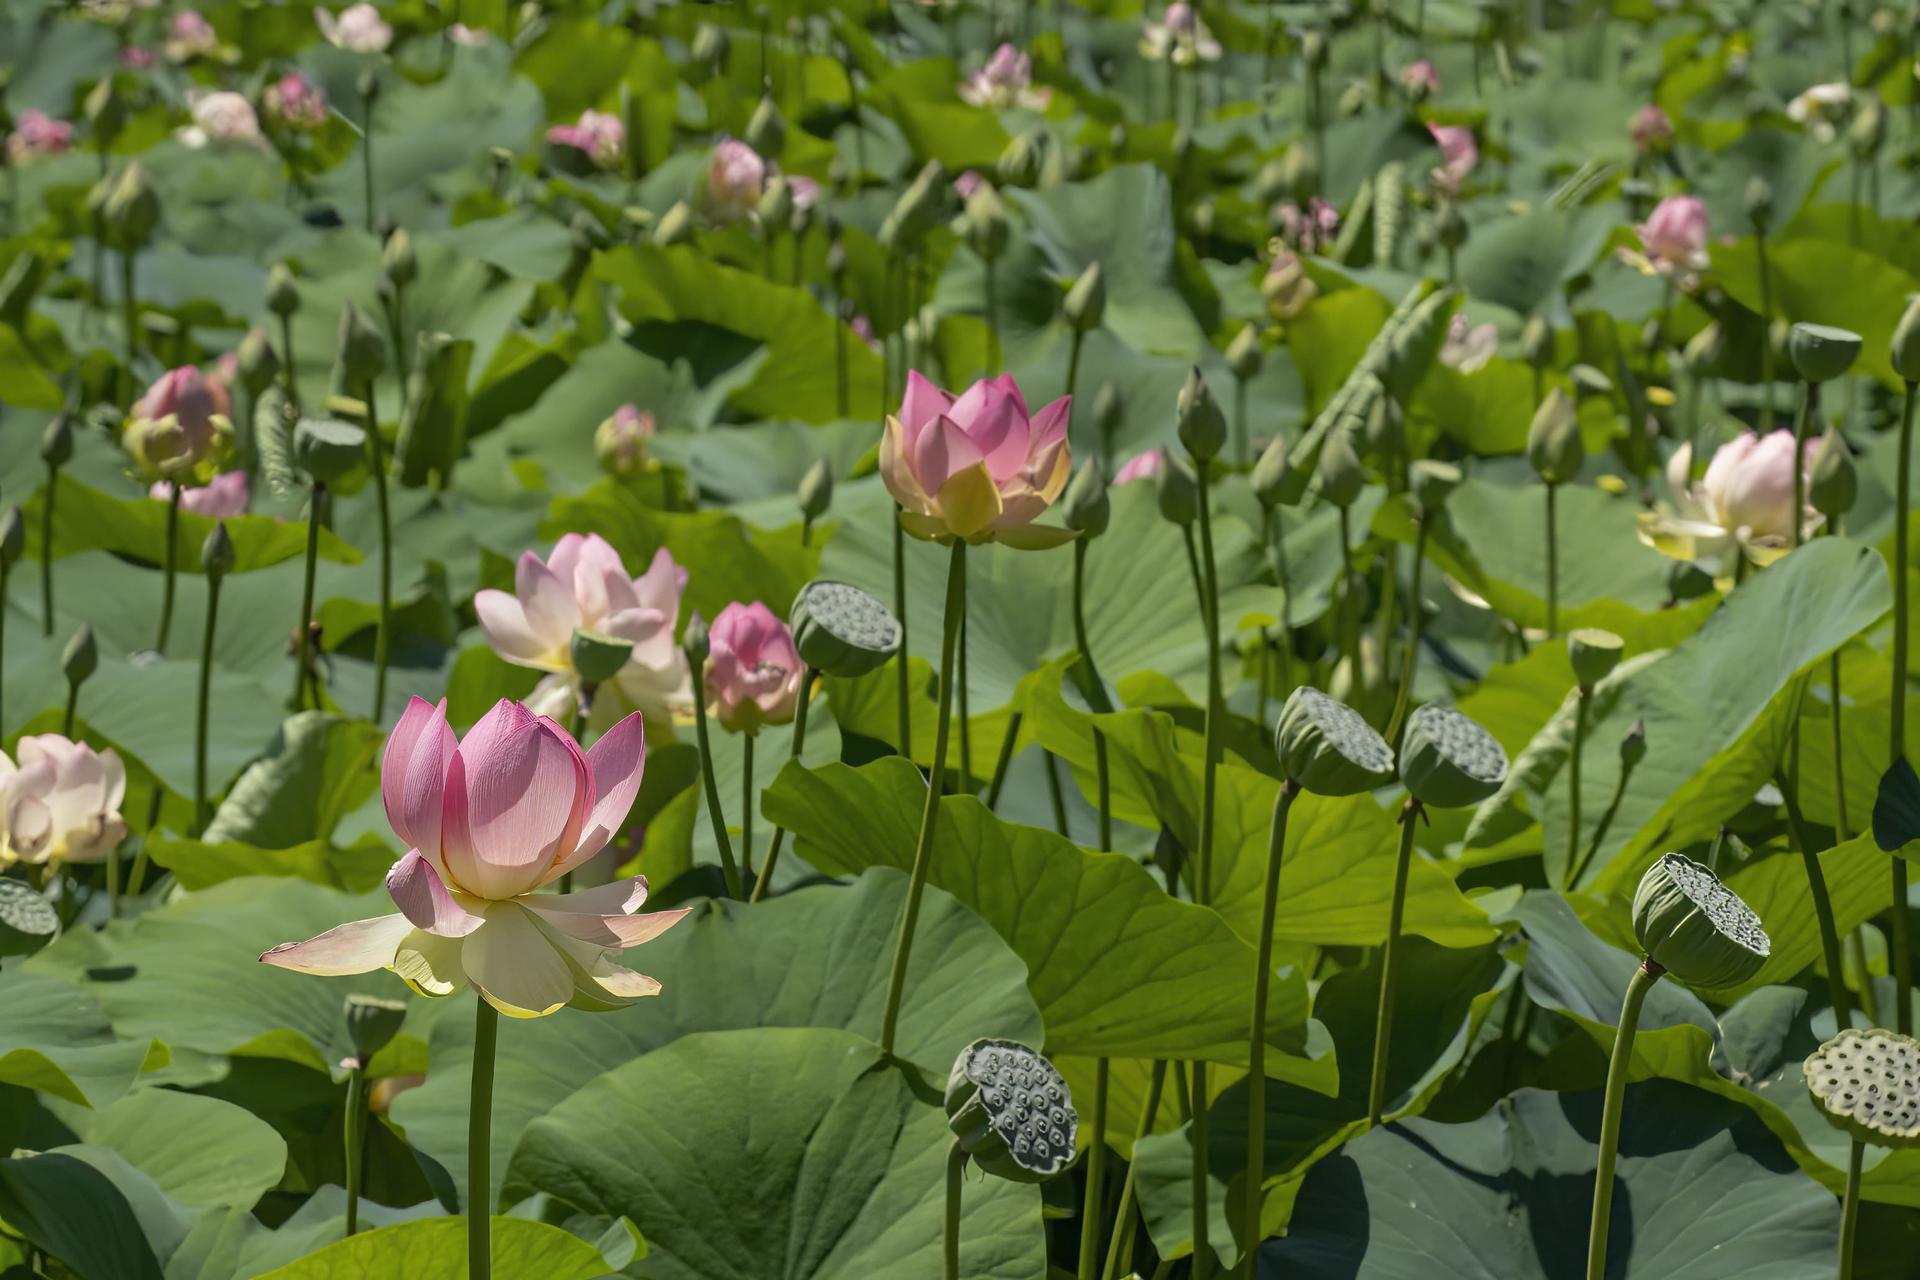 Lotus Flower with Seedpods